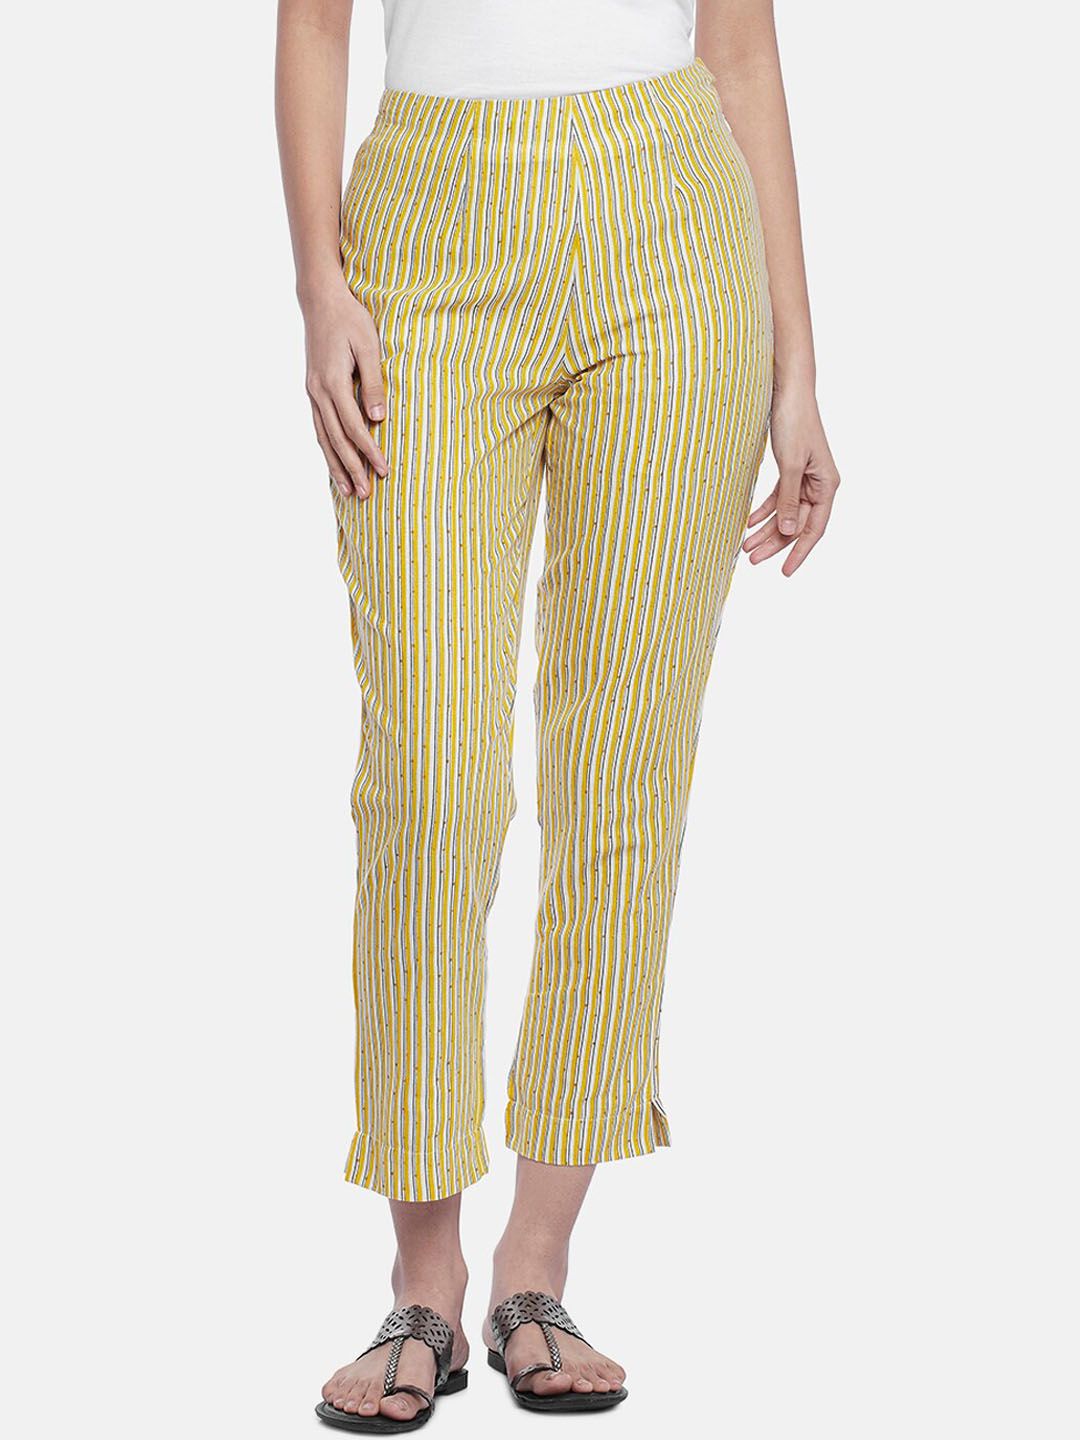 RANGMANCH BY PANTALOONS Women Off-White Striped Slim Fit Trousers Price in India